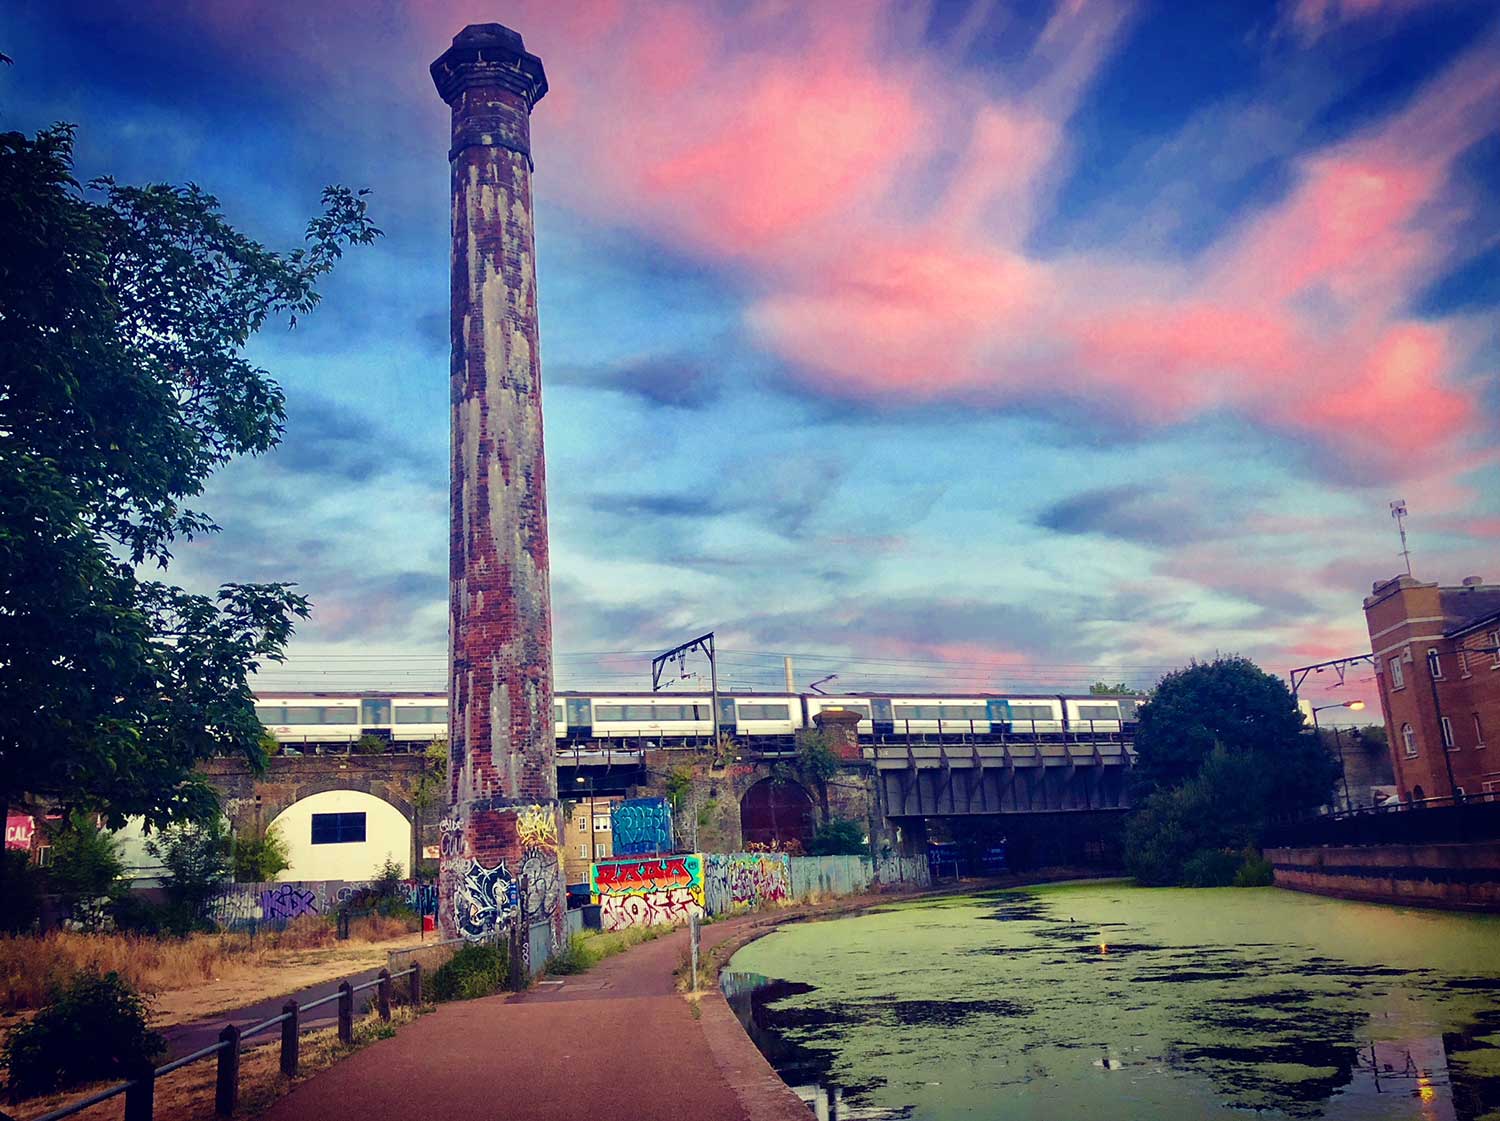 Brick tower by algae covered canal with dramatic sky